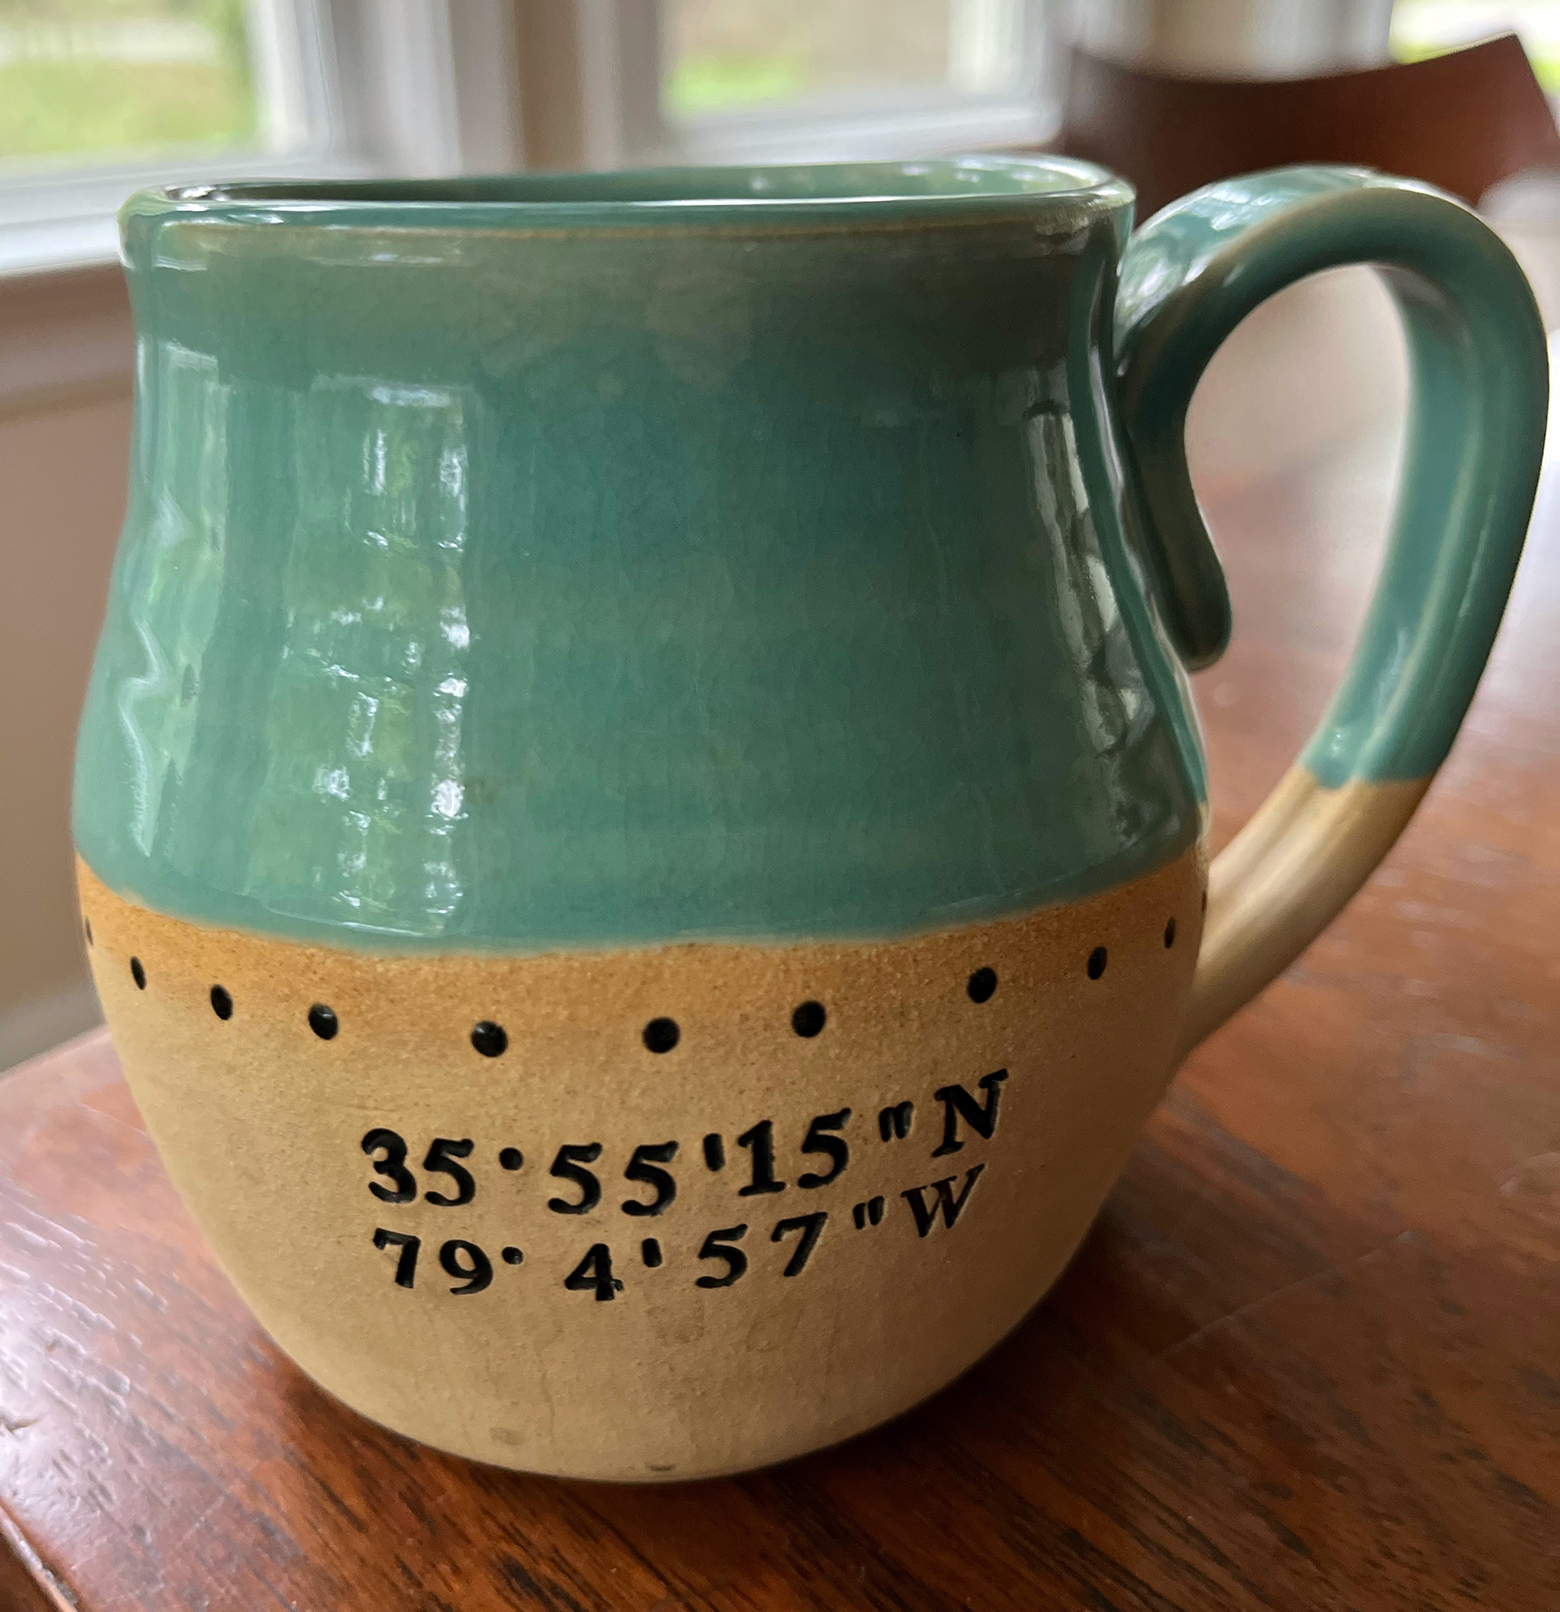 A coffee mug on a table in front of a window. On the lower half of the mug is a set of longitude and latitude coordinates.